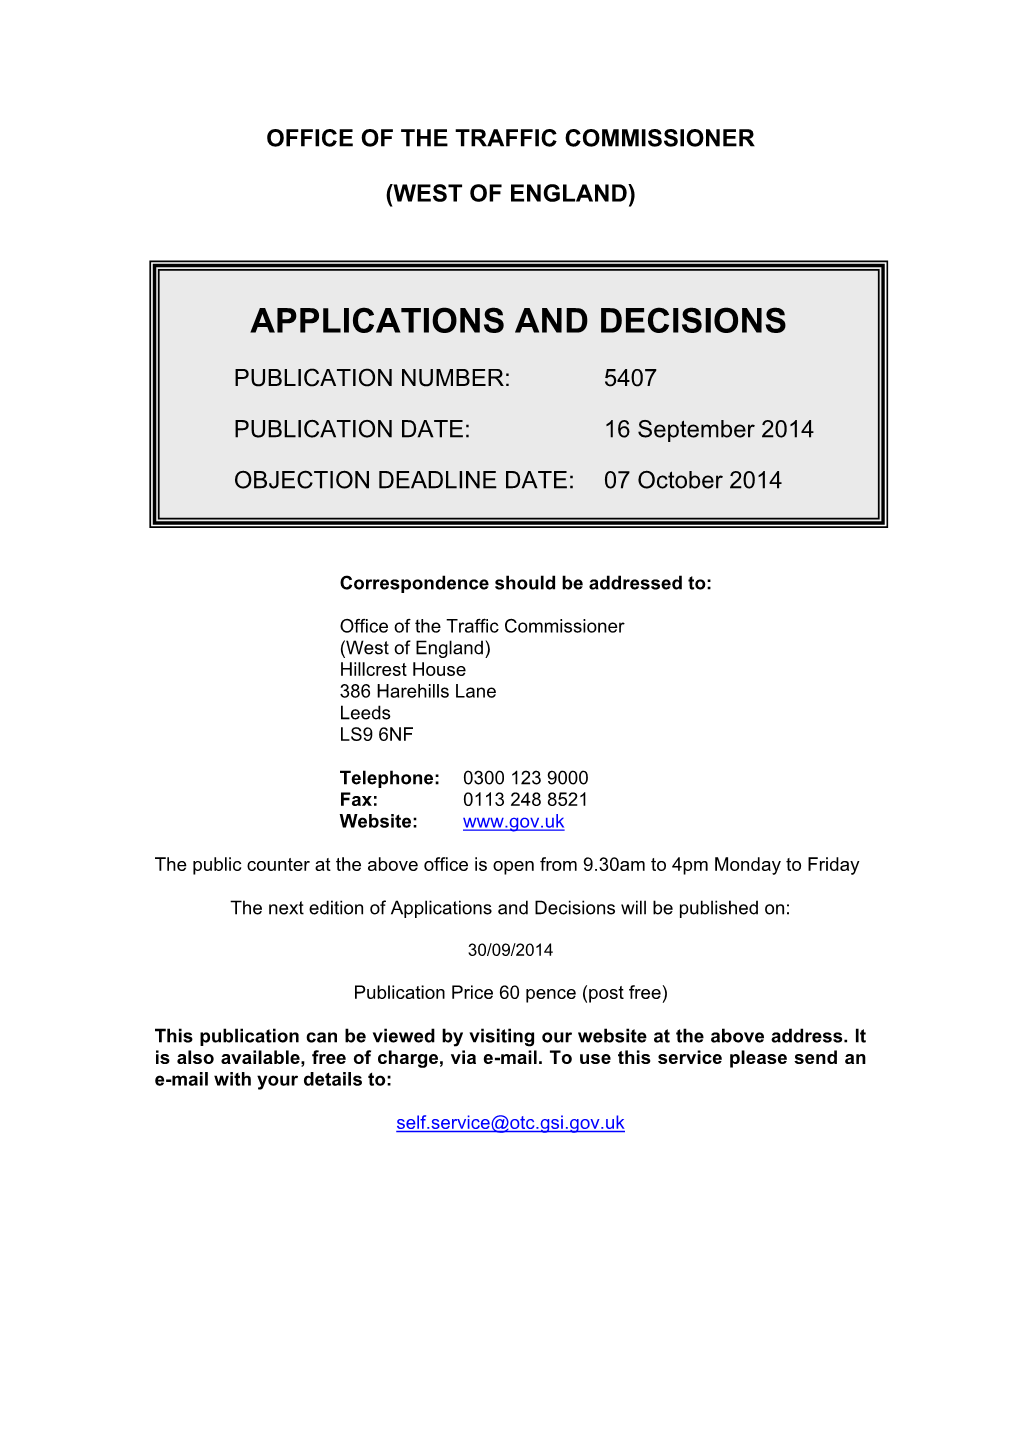 Applications and Decisions 16 September 2014